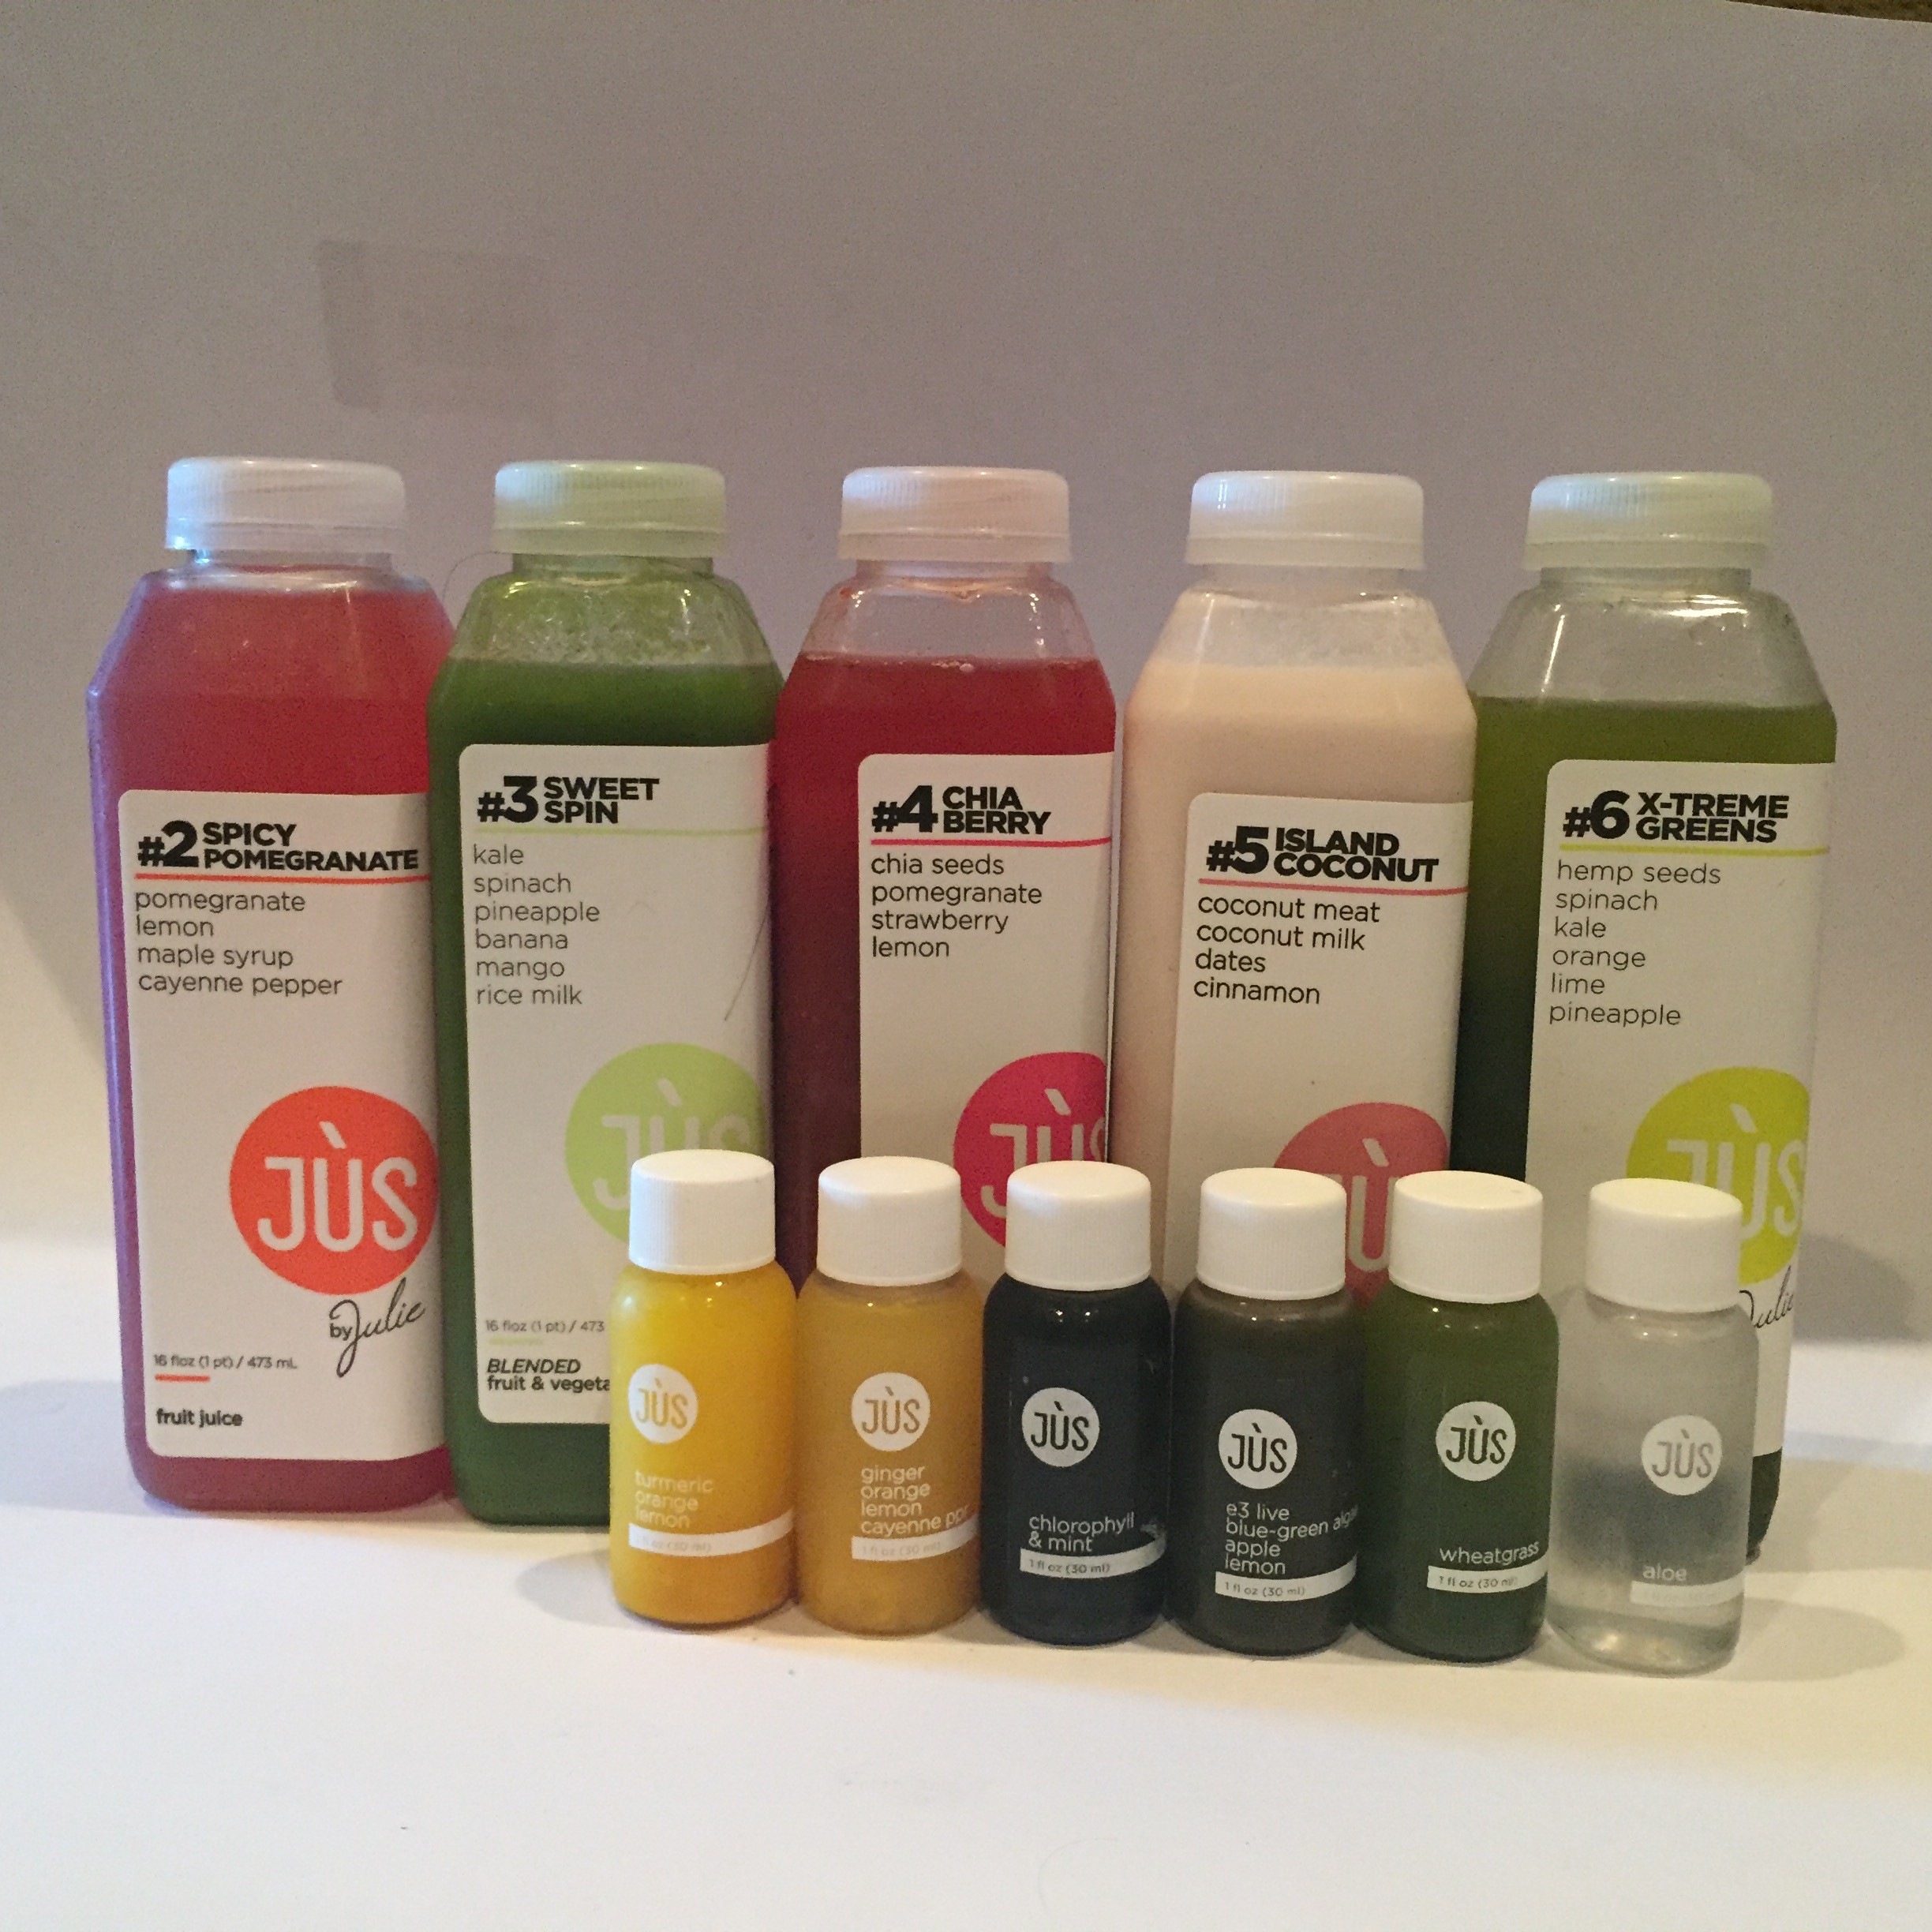 Juicing the right way with JUS by Julie